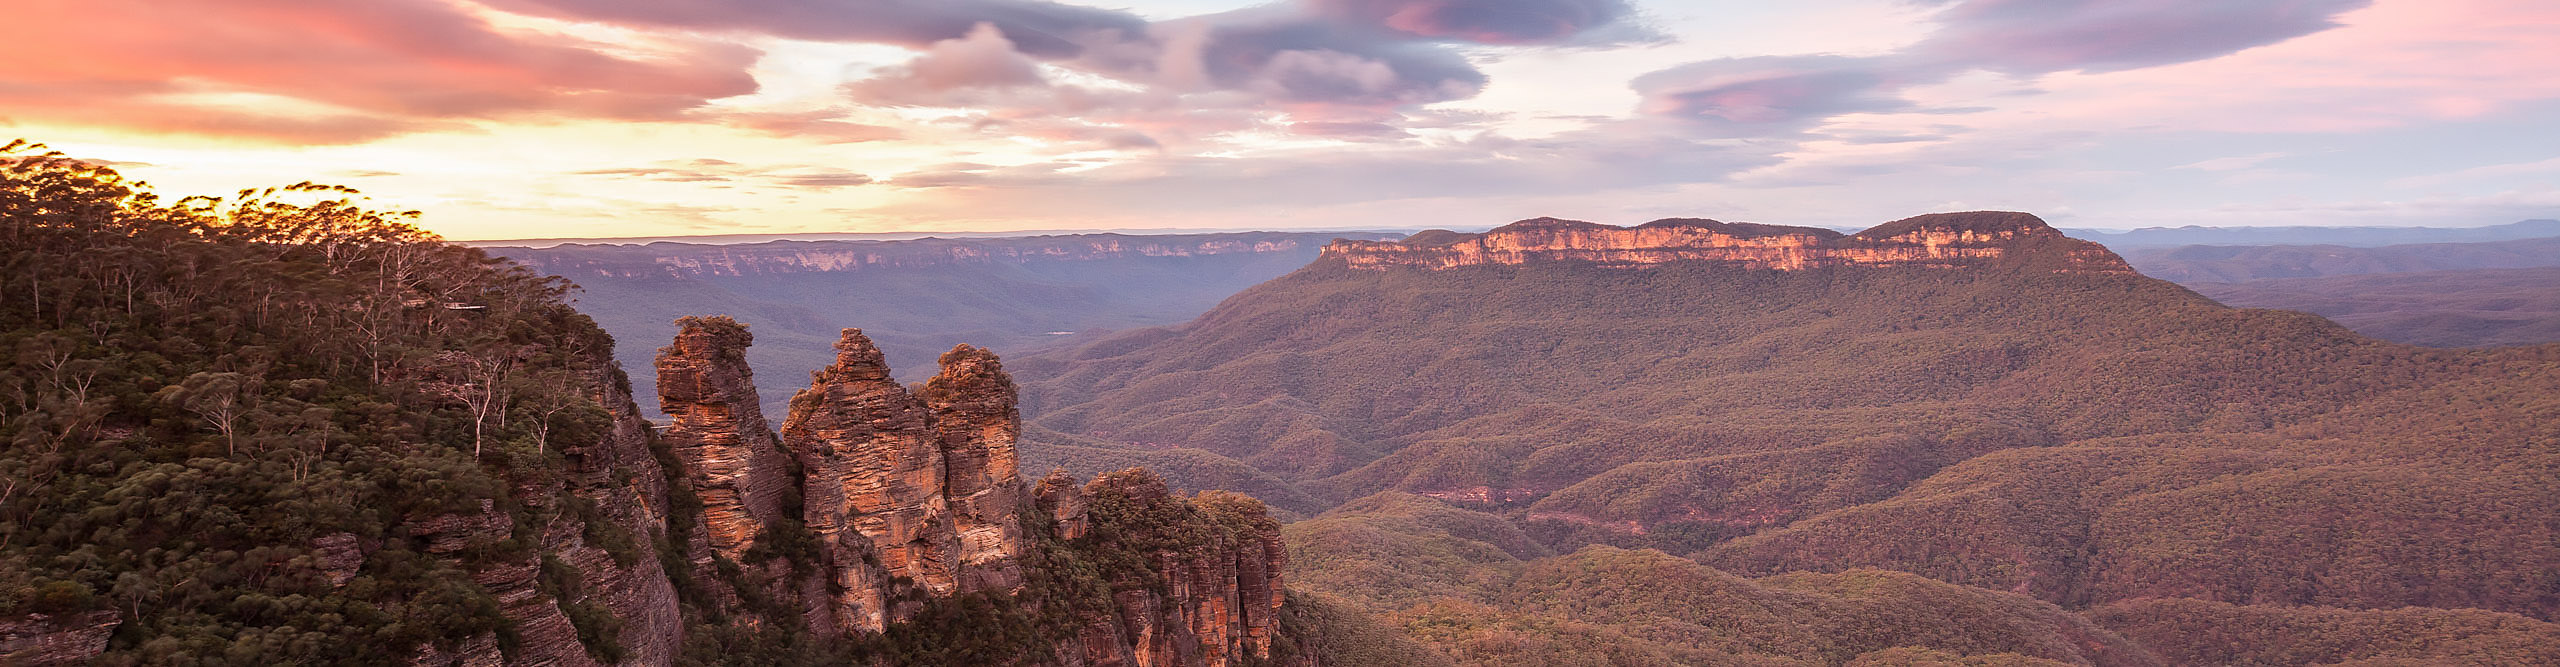 Sunrise with a purple sky over the Three Sisters at the Blue Mountains national park